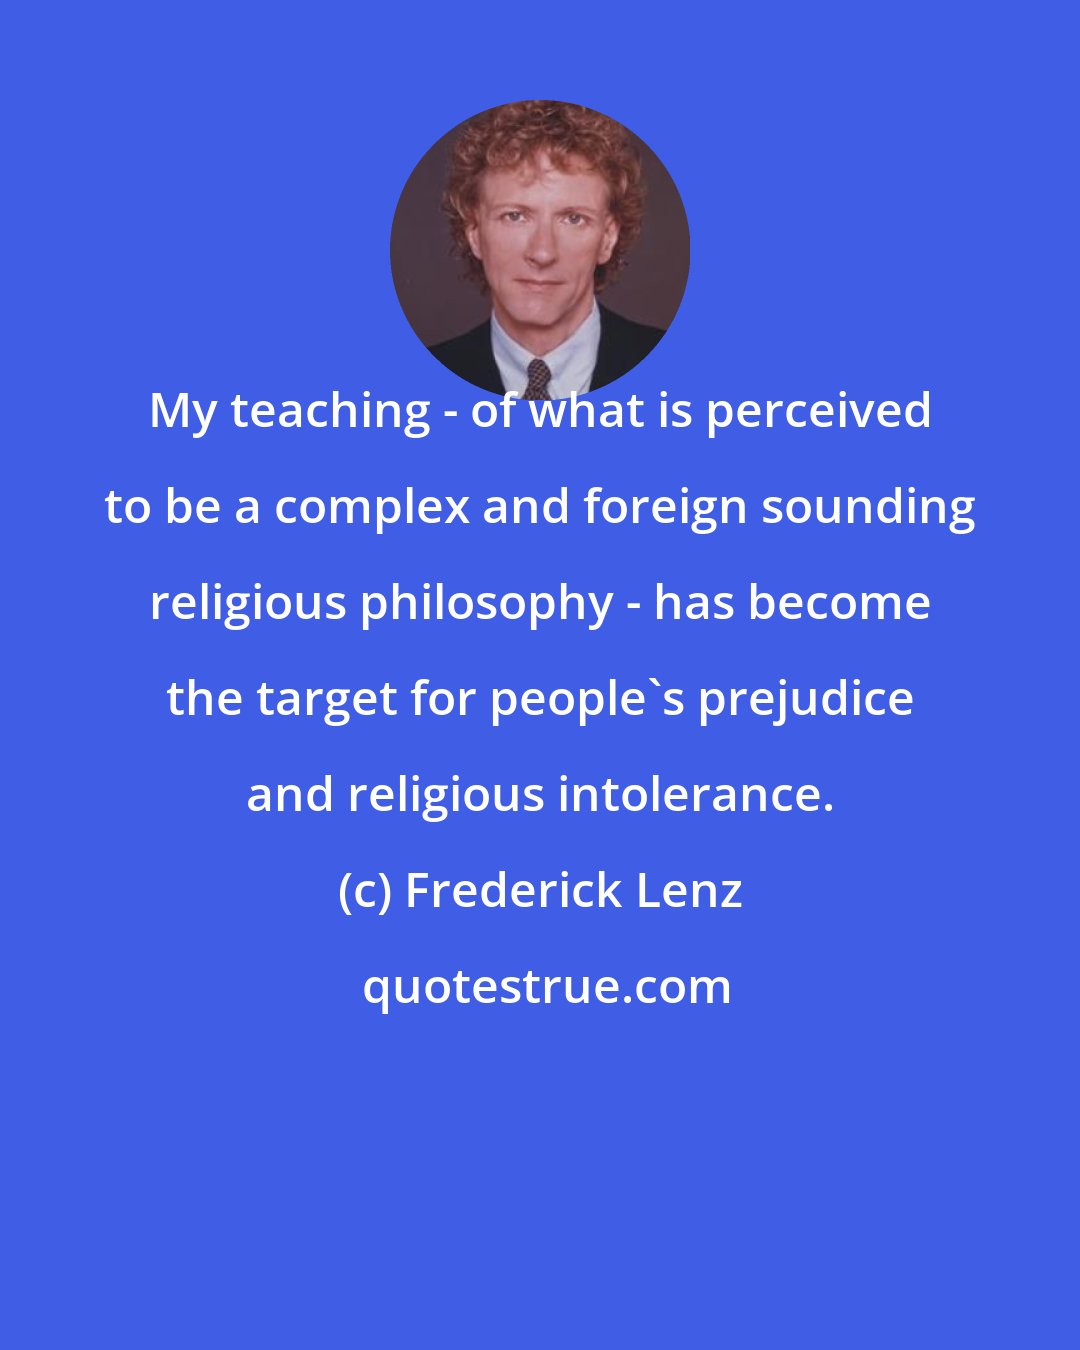 Frederick Lenz: My teaching - of what is perceived to be a complex and foreign sounding religious philosophy - has become the target for people's prejudice and religious intolerance.